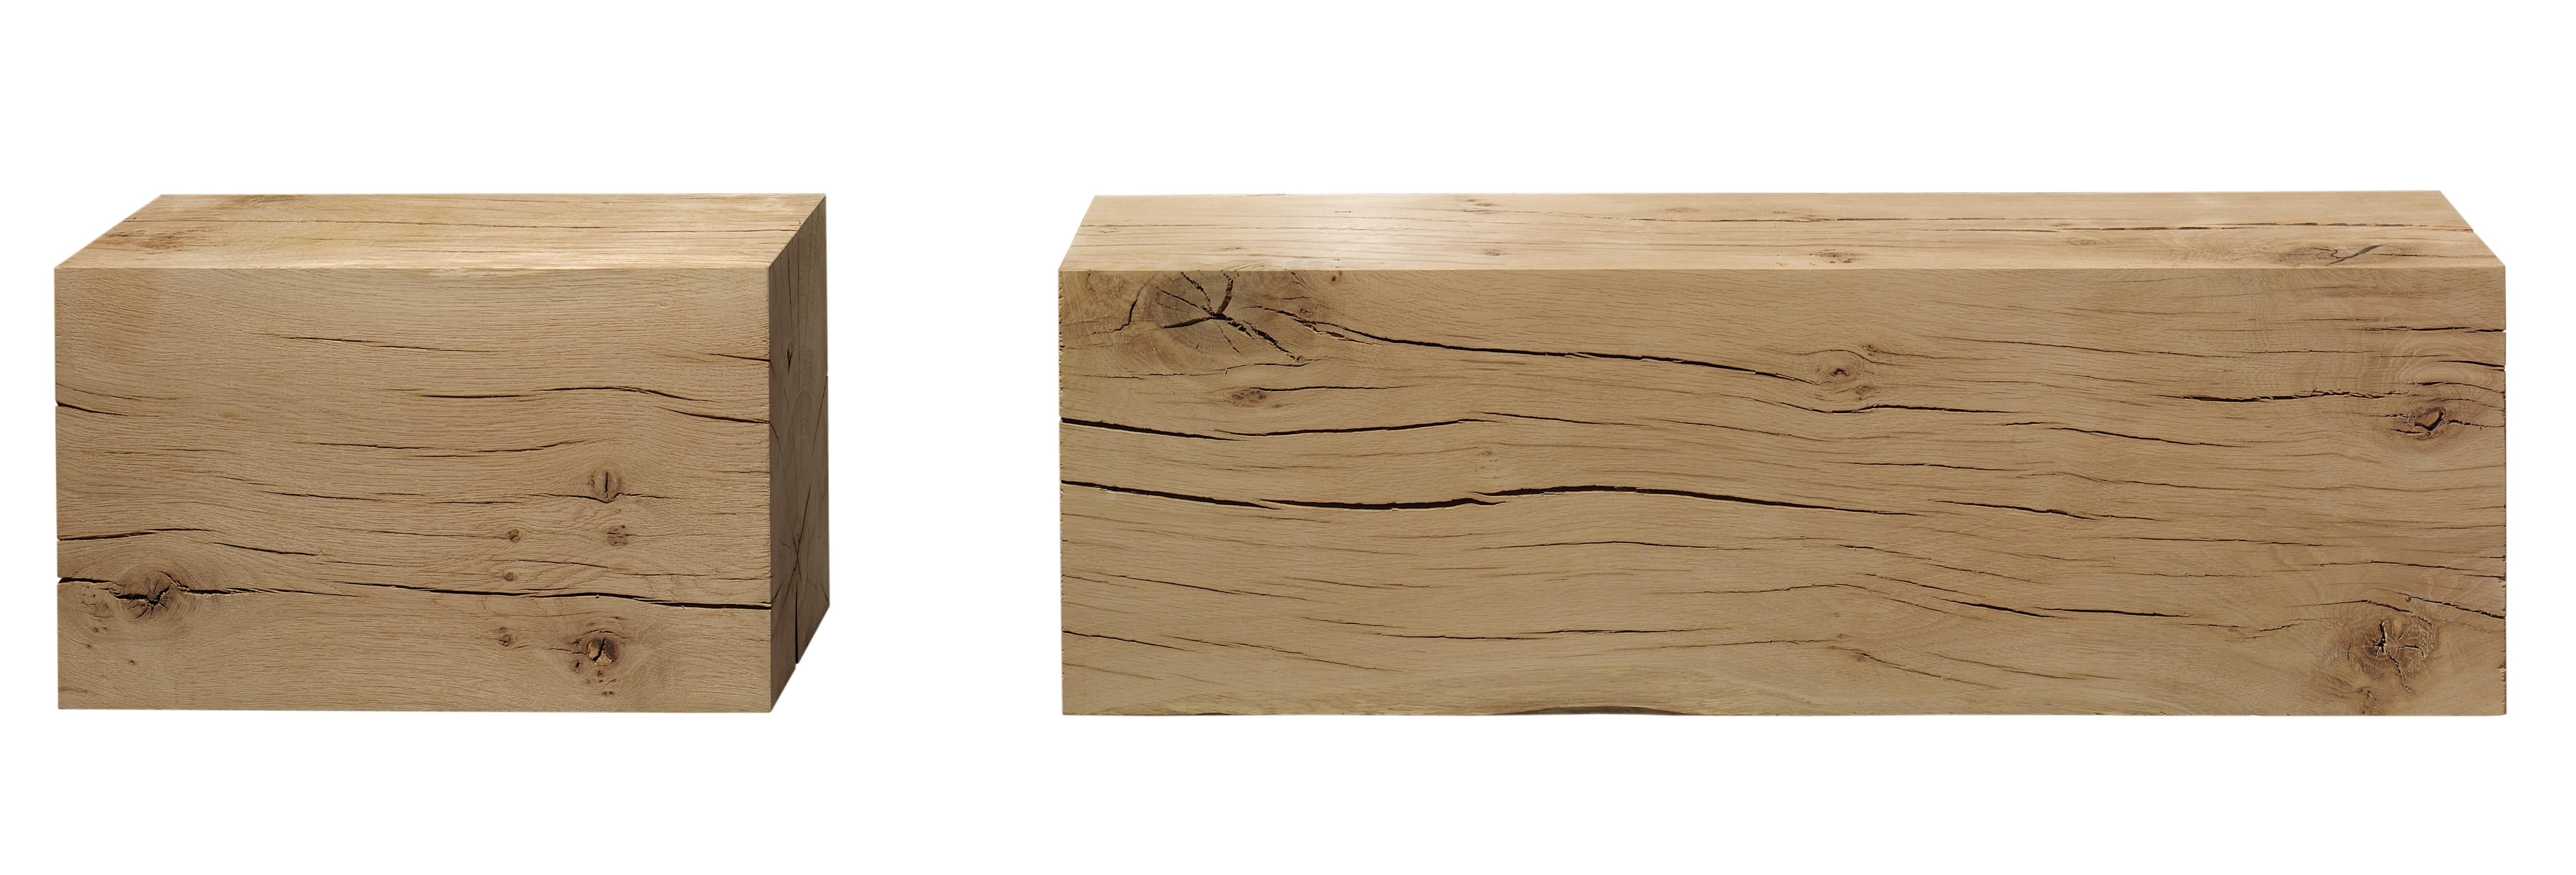 The object Raw is a robust piece crafted from seasoned European oak, which is rarely available in such wide dimensions as used in this piece. Reduced to the essential features, the rectangular form is untreated and bare with the natural markings